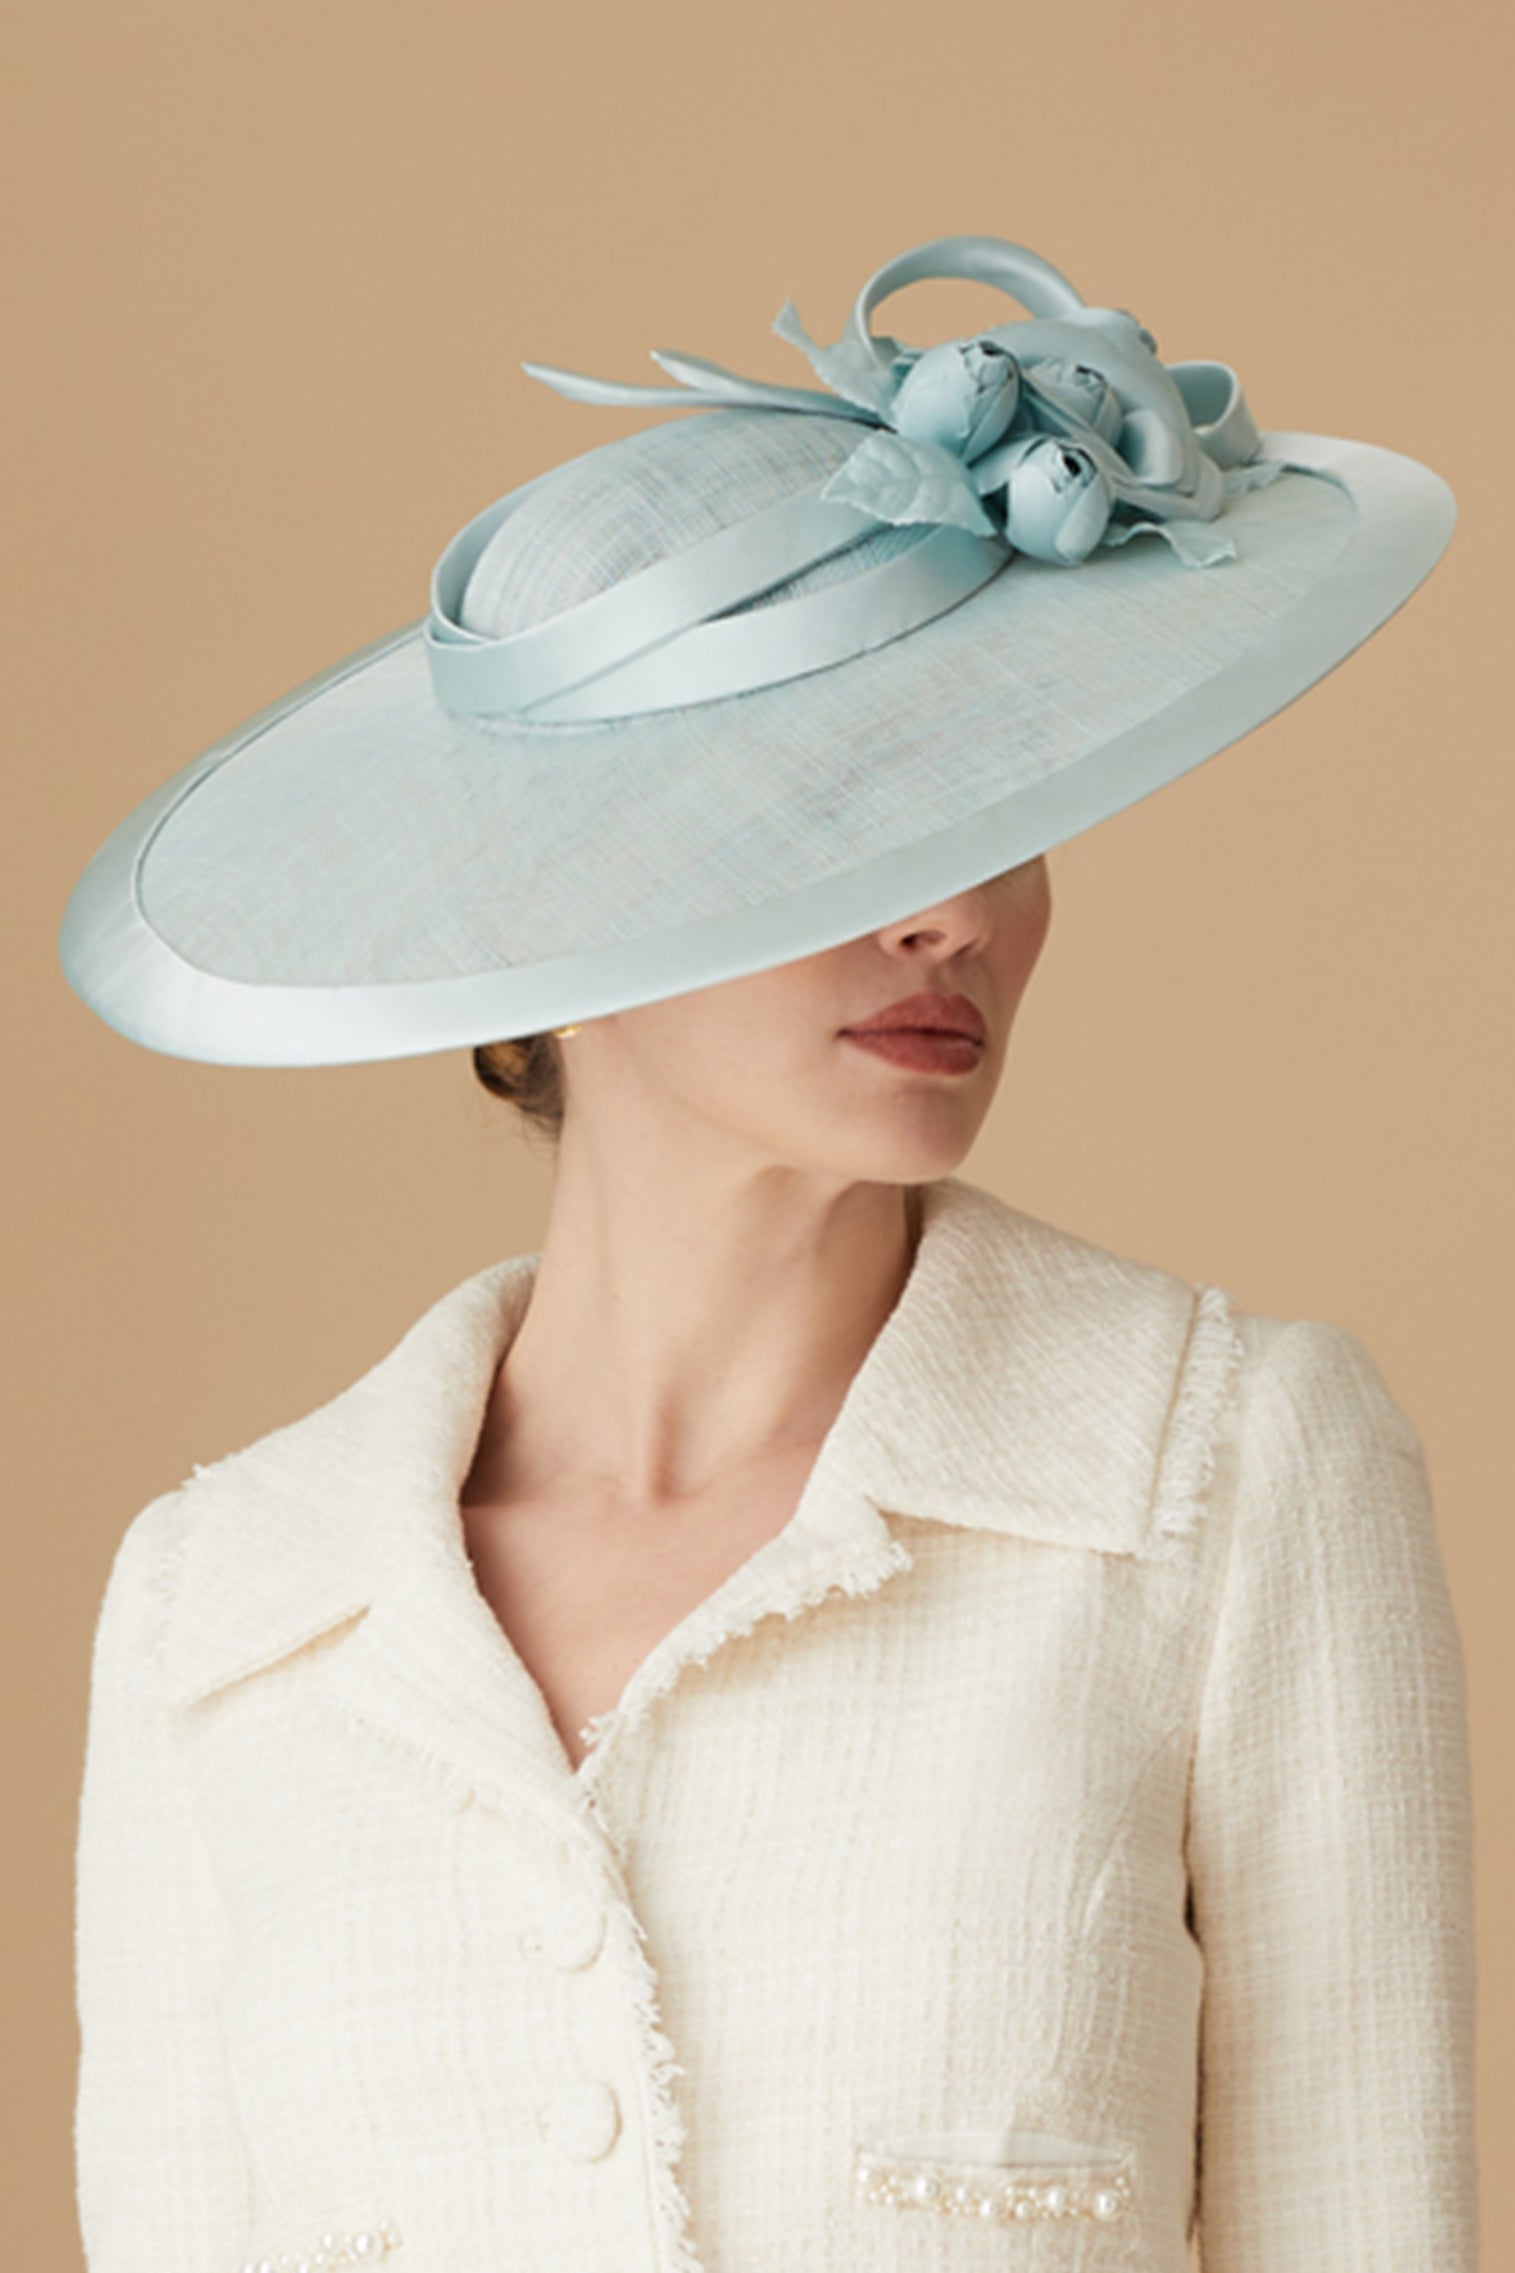 Jasmine Duck Egg Slice Hat - Lock Couture by Awon Golding - Lock & Co. Hatters London UK